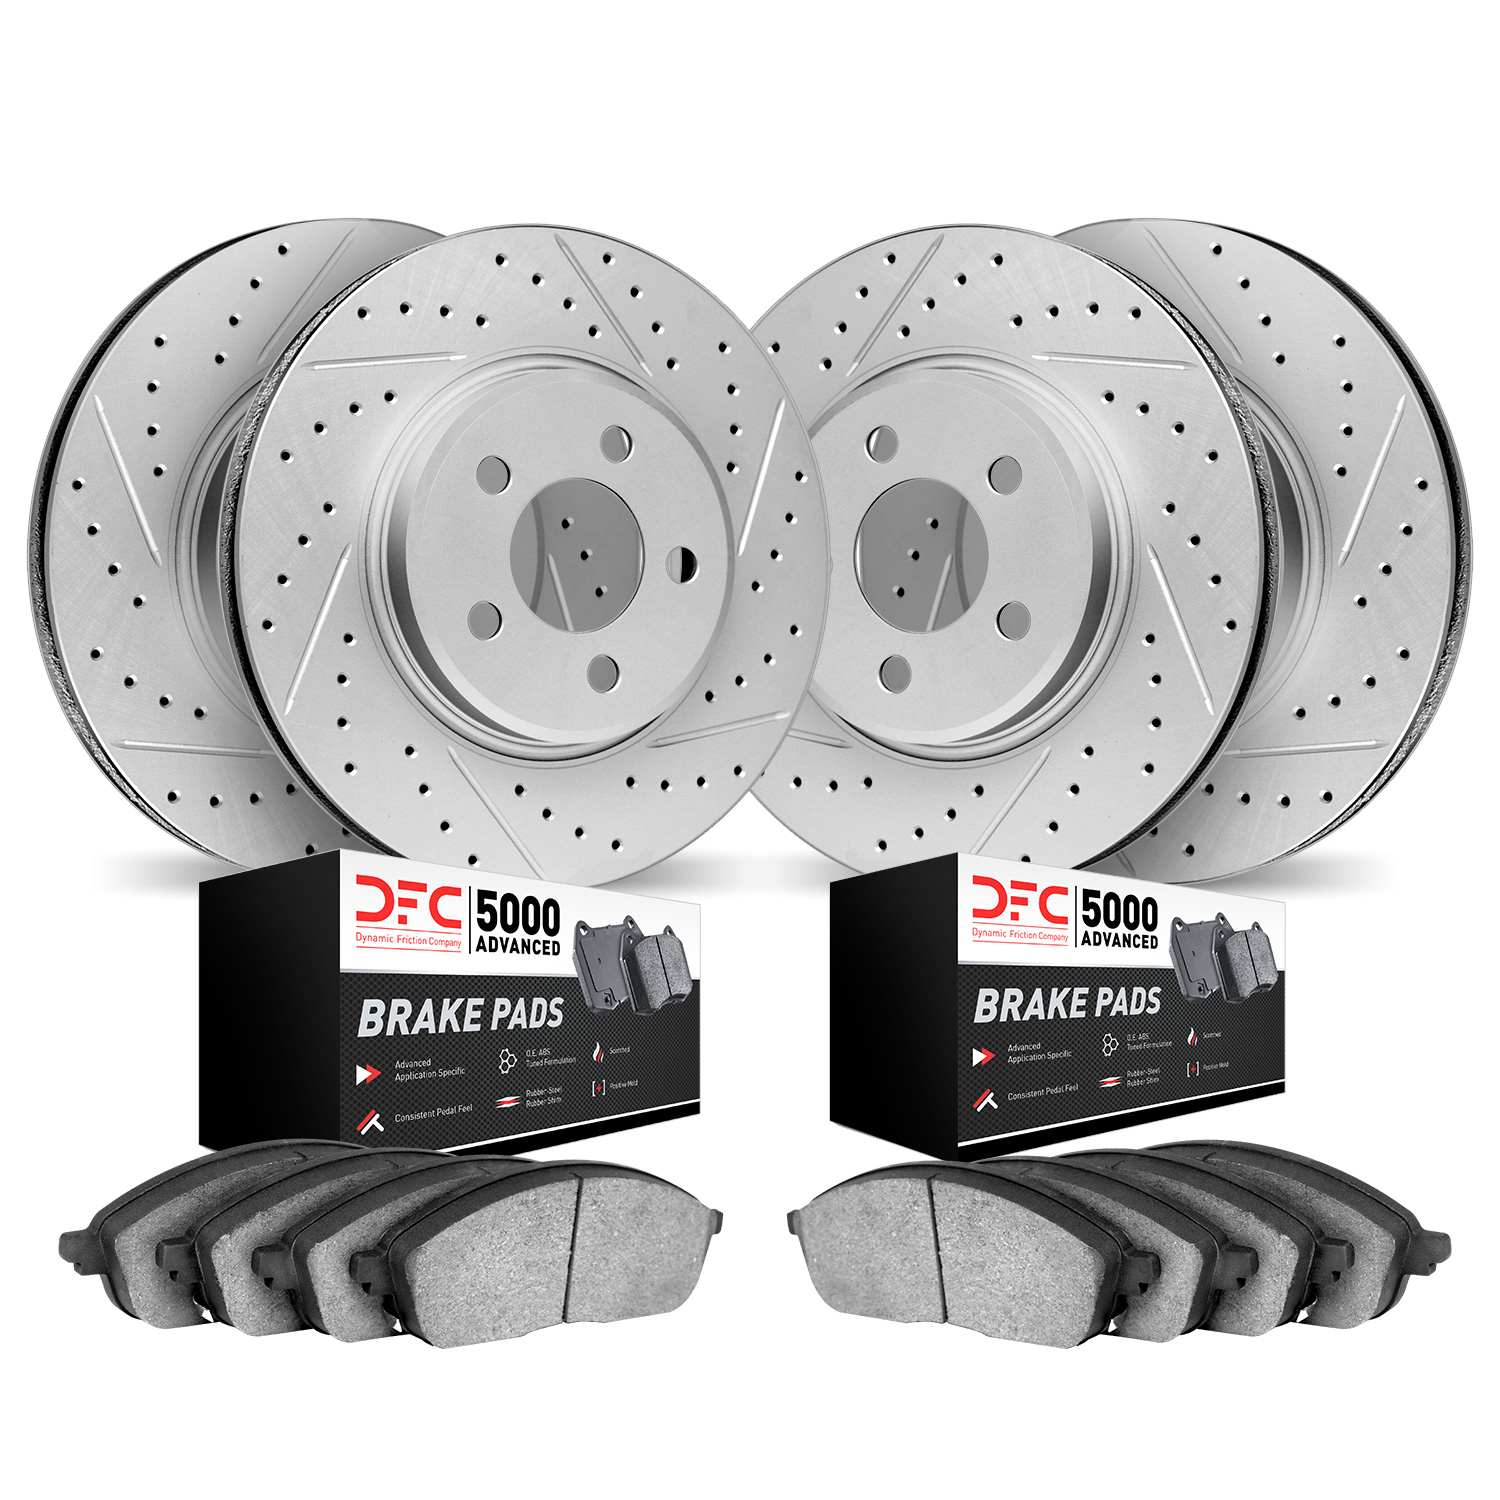 2504-80032 Geoperformance Drilled/Slotted Rotors w/5000 Advanced Brake Pads Kit, 2007-2012 Ford/Lincoln/Mercury/Mazda, Position: